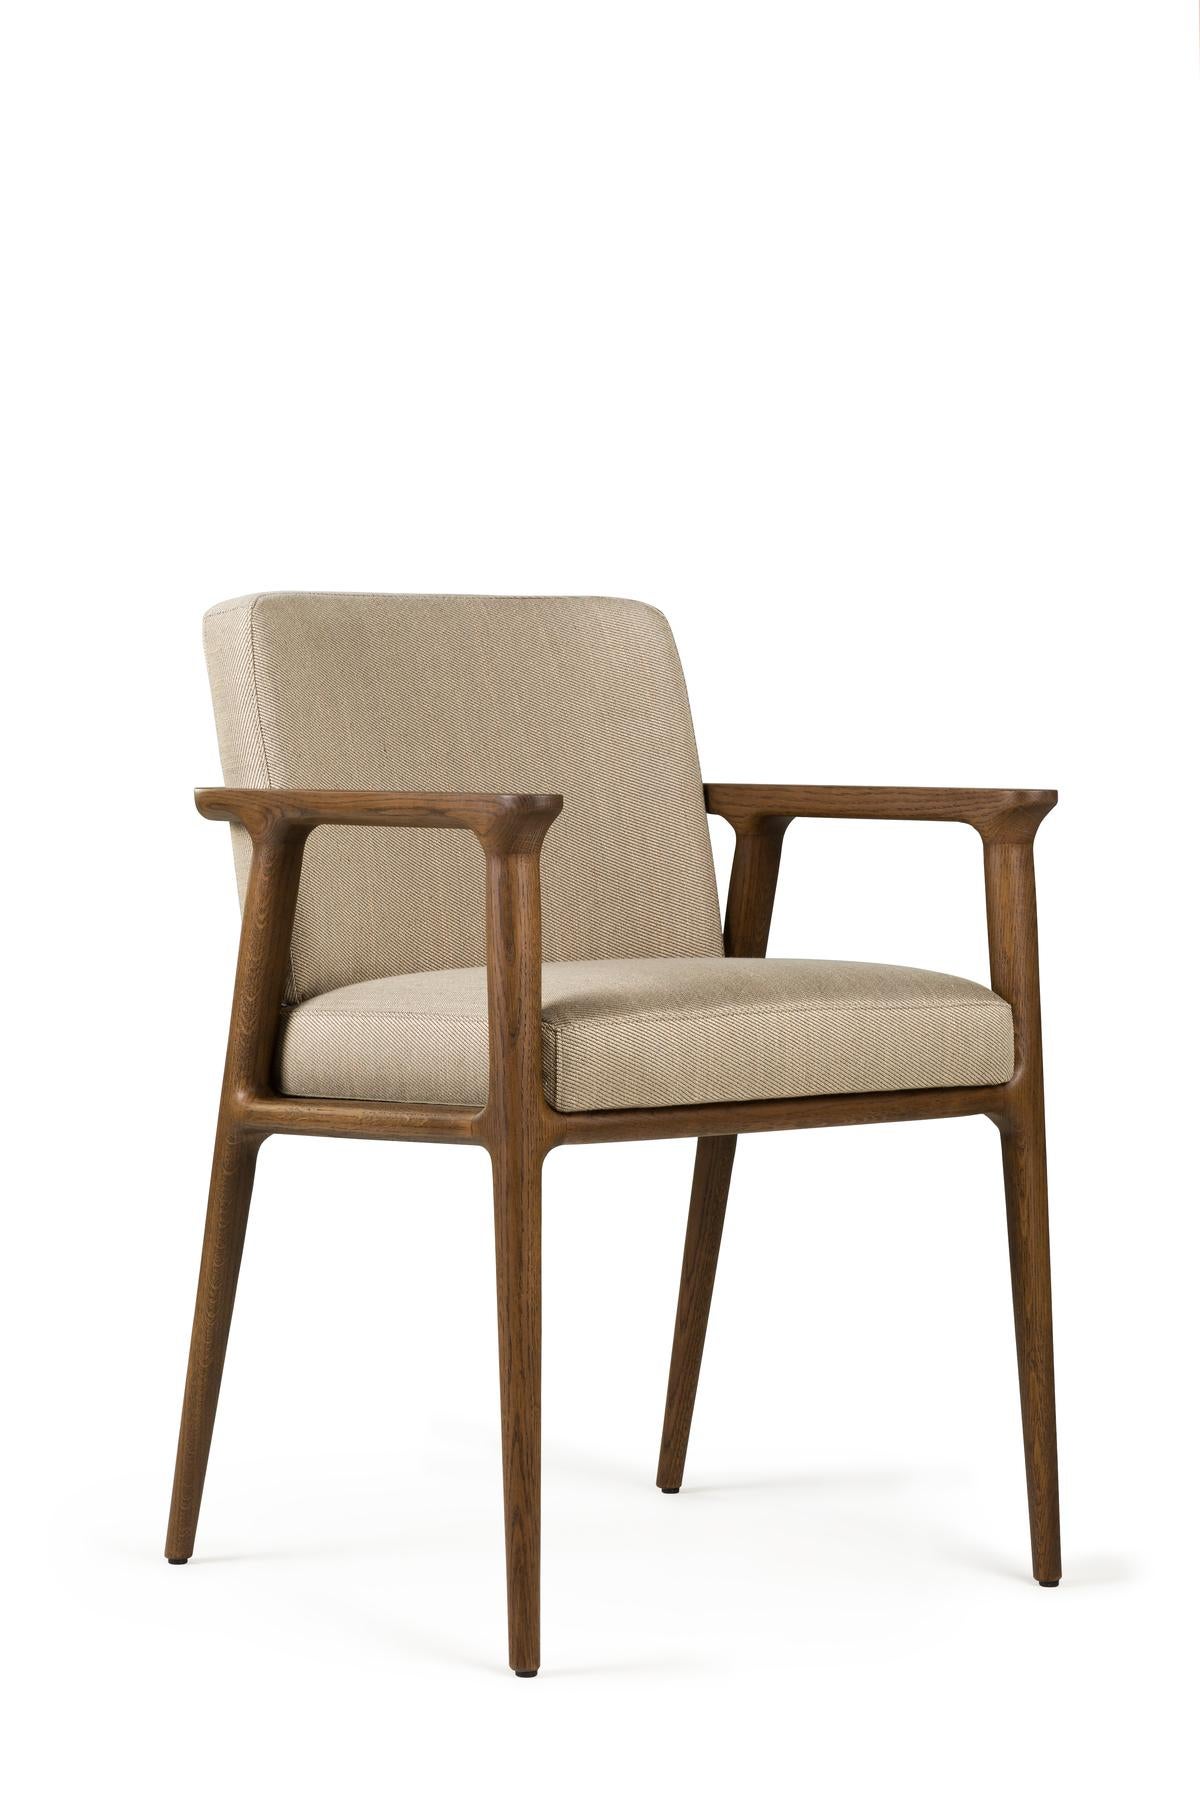 Dining at home acquires a whole new meaning with the classic elegance and contemporary comfort of the Zio dining chair by Marcel Wanders. Sitting in its solid, sculptured wooden structure and soft cushioned body makes you feel immediately at ease,